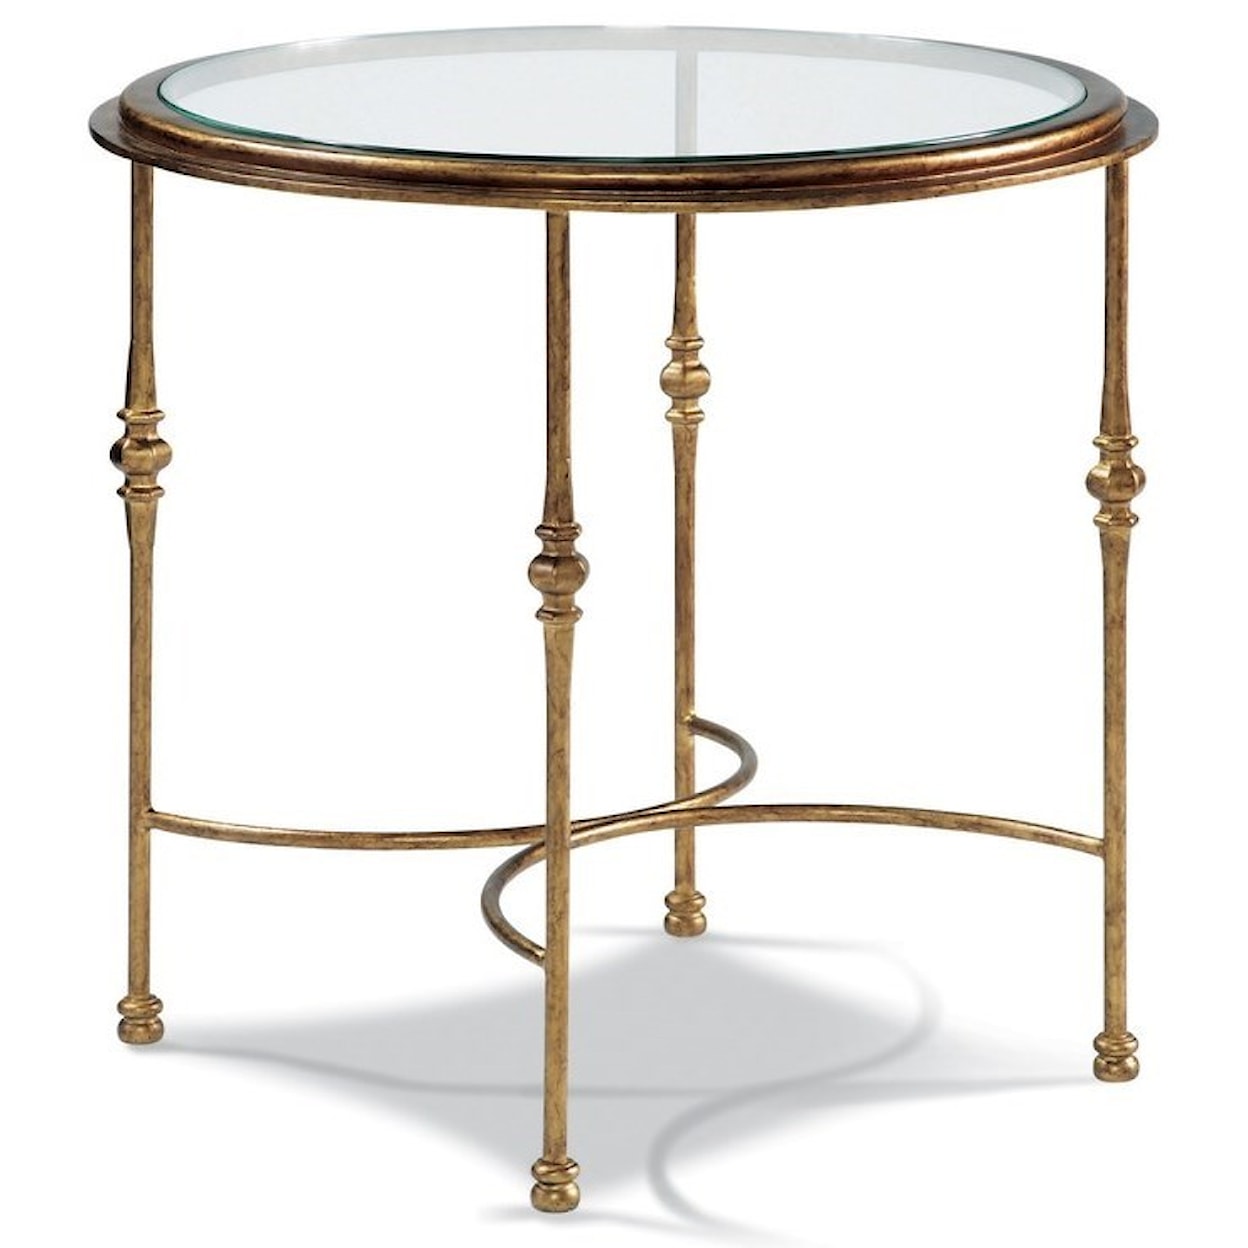 CTH Sherrill Occasional Masterpiece - Princeton Round End Table